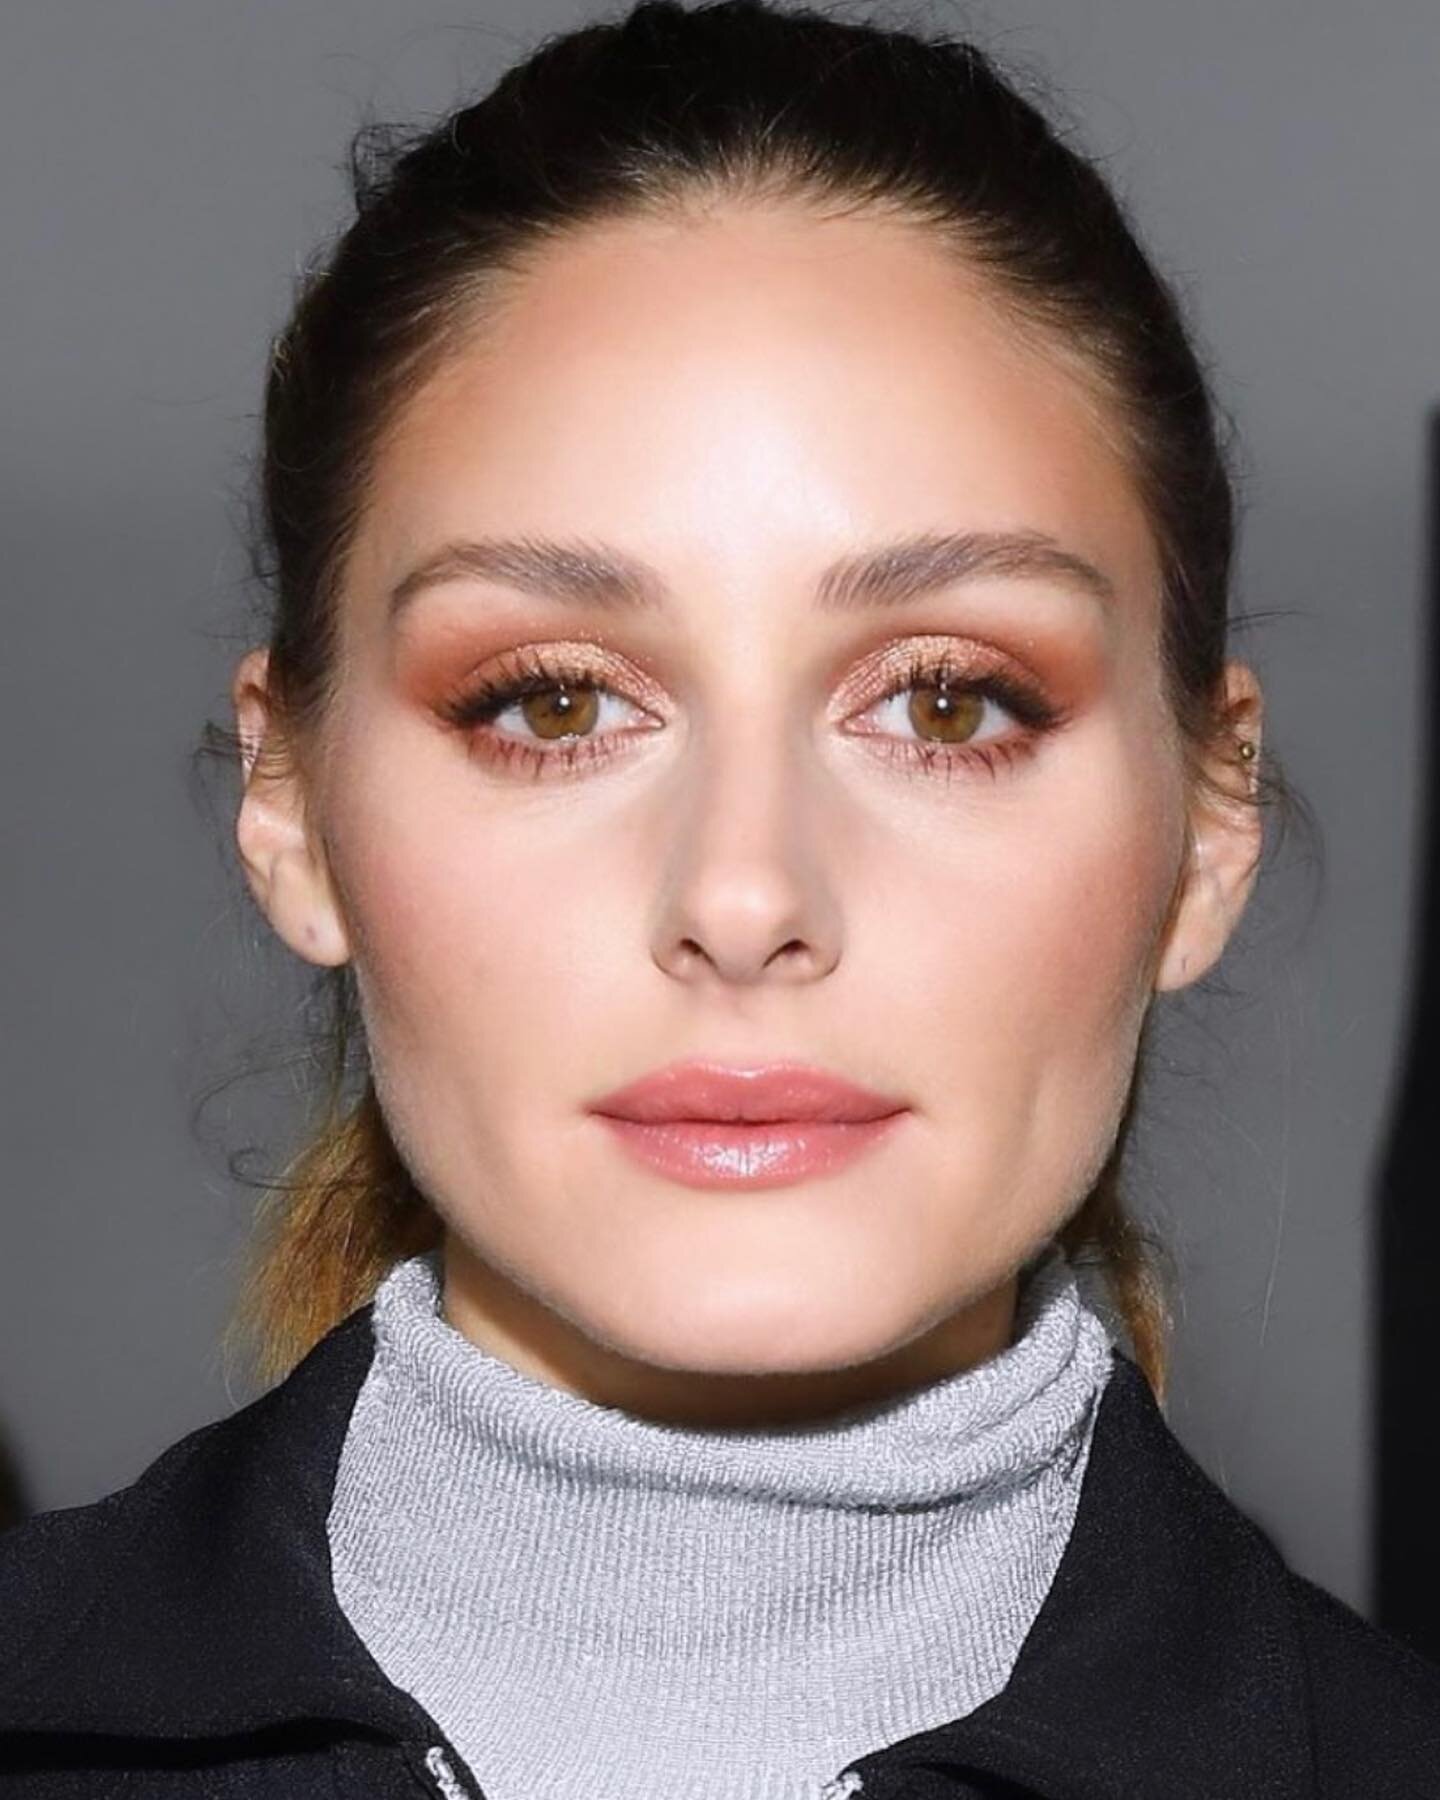 Happy birthday @oliviapalermo 🤍🤍🤍
Here are a couple of my favourite looks we&rsquo;ve done together 🌹😍🌹
.
.
.
.
.#OliviaPalermo #oliviapalermomakeup #makeup #promua #londonmua